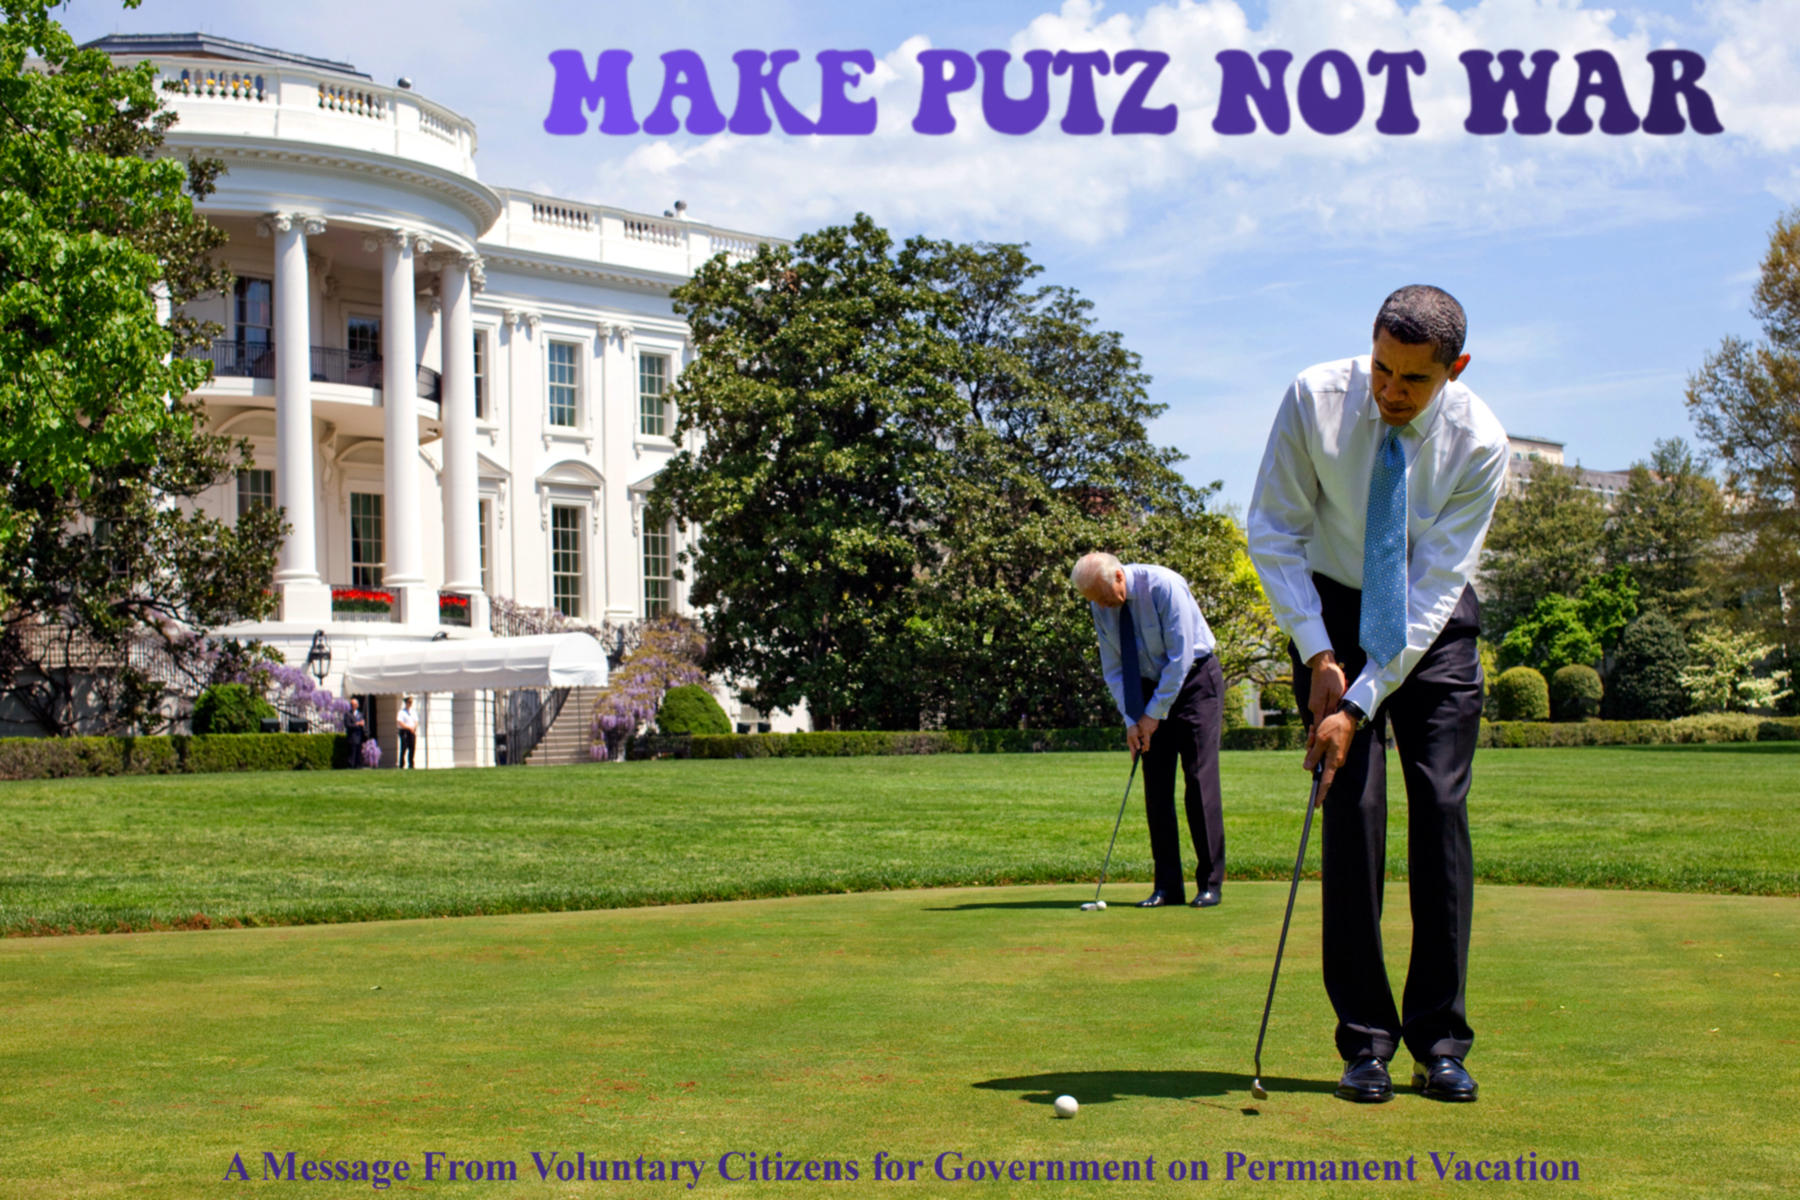 two men in suits and ties playing golf in front of a white house